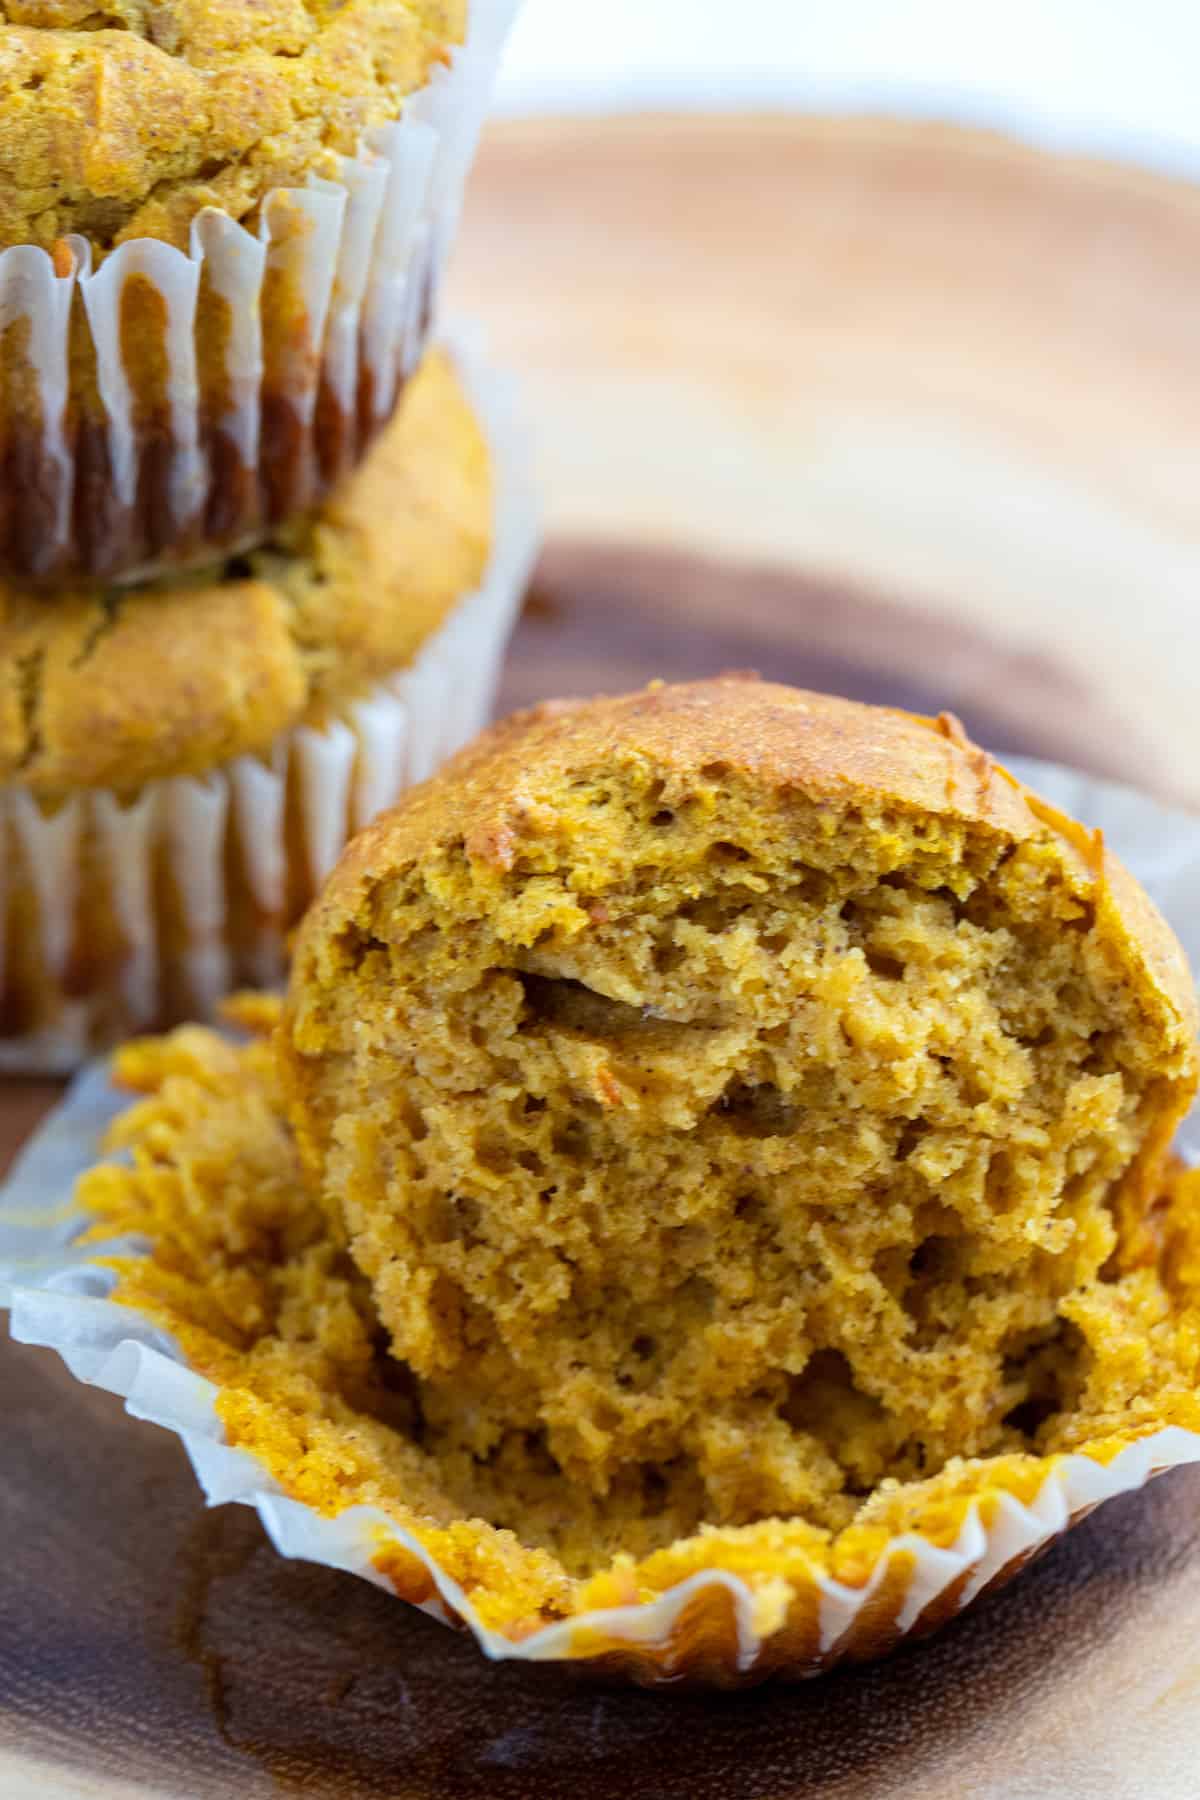 Pumpkin muffin in a muffin liner cut in half to reveal the fluffy center.